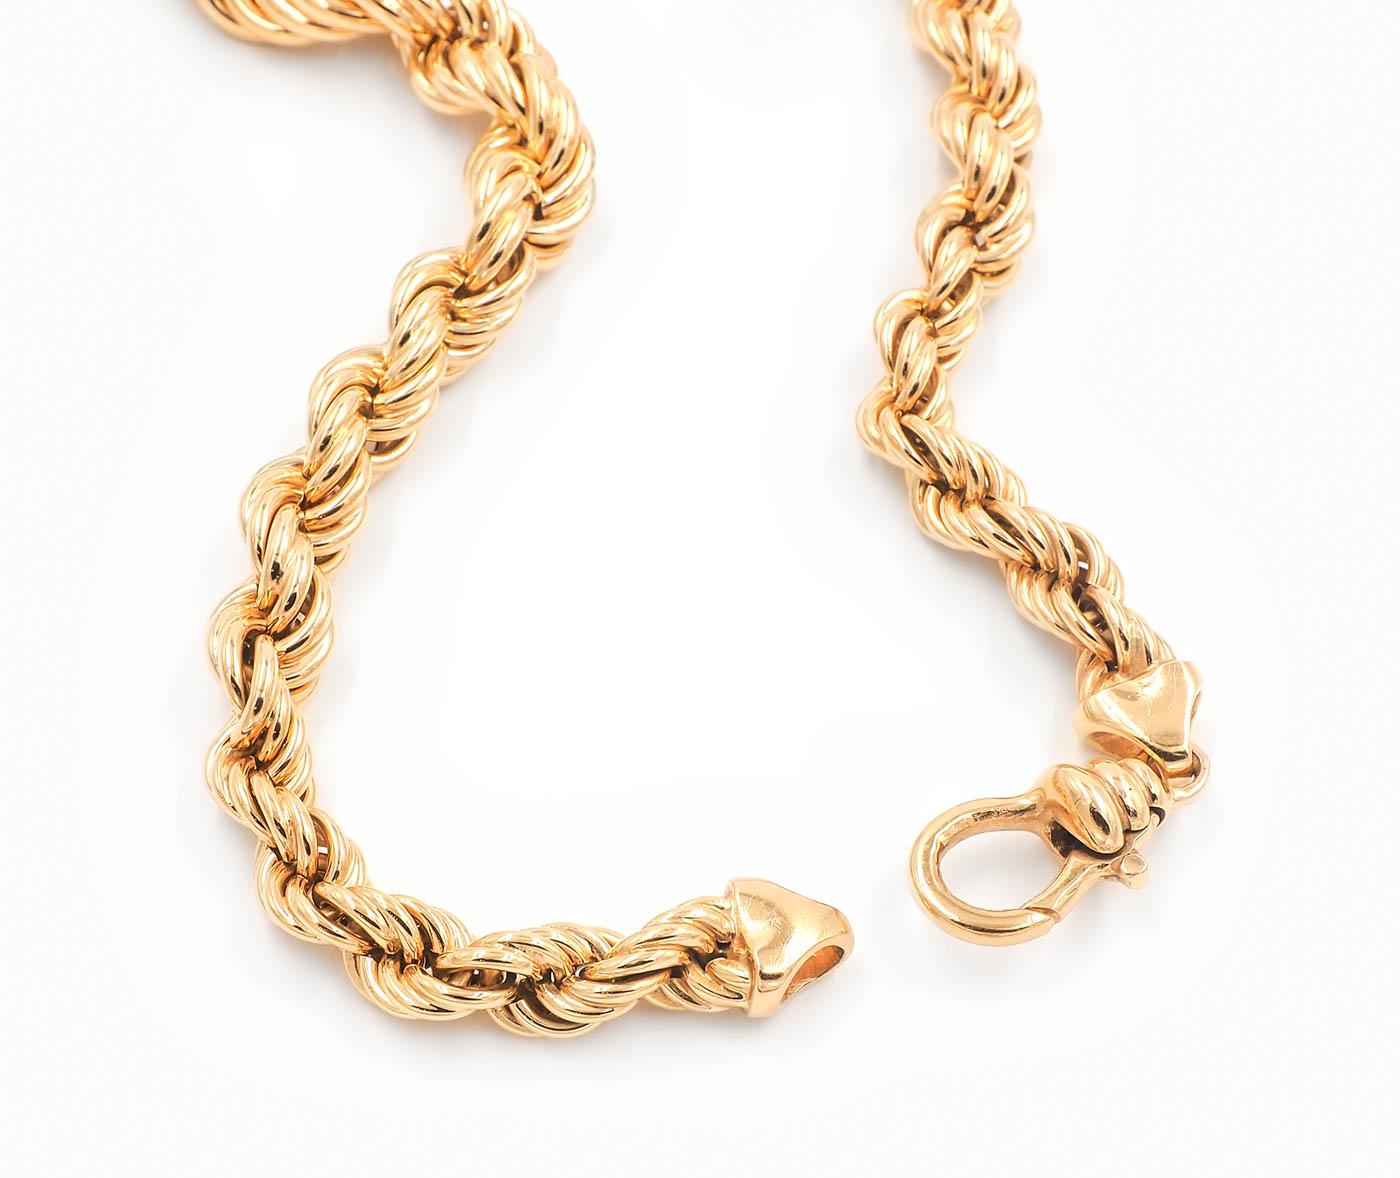 10 pennyweight gold chain